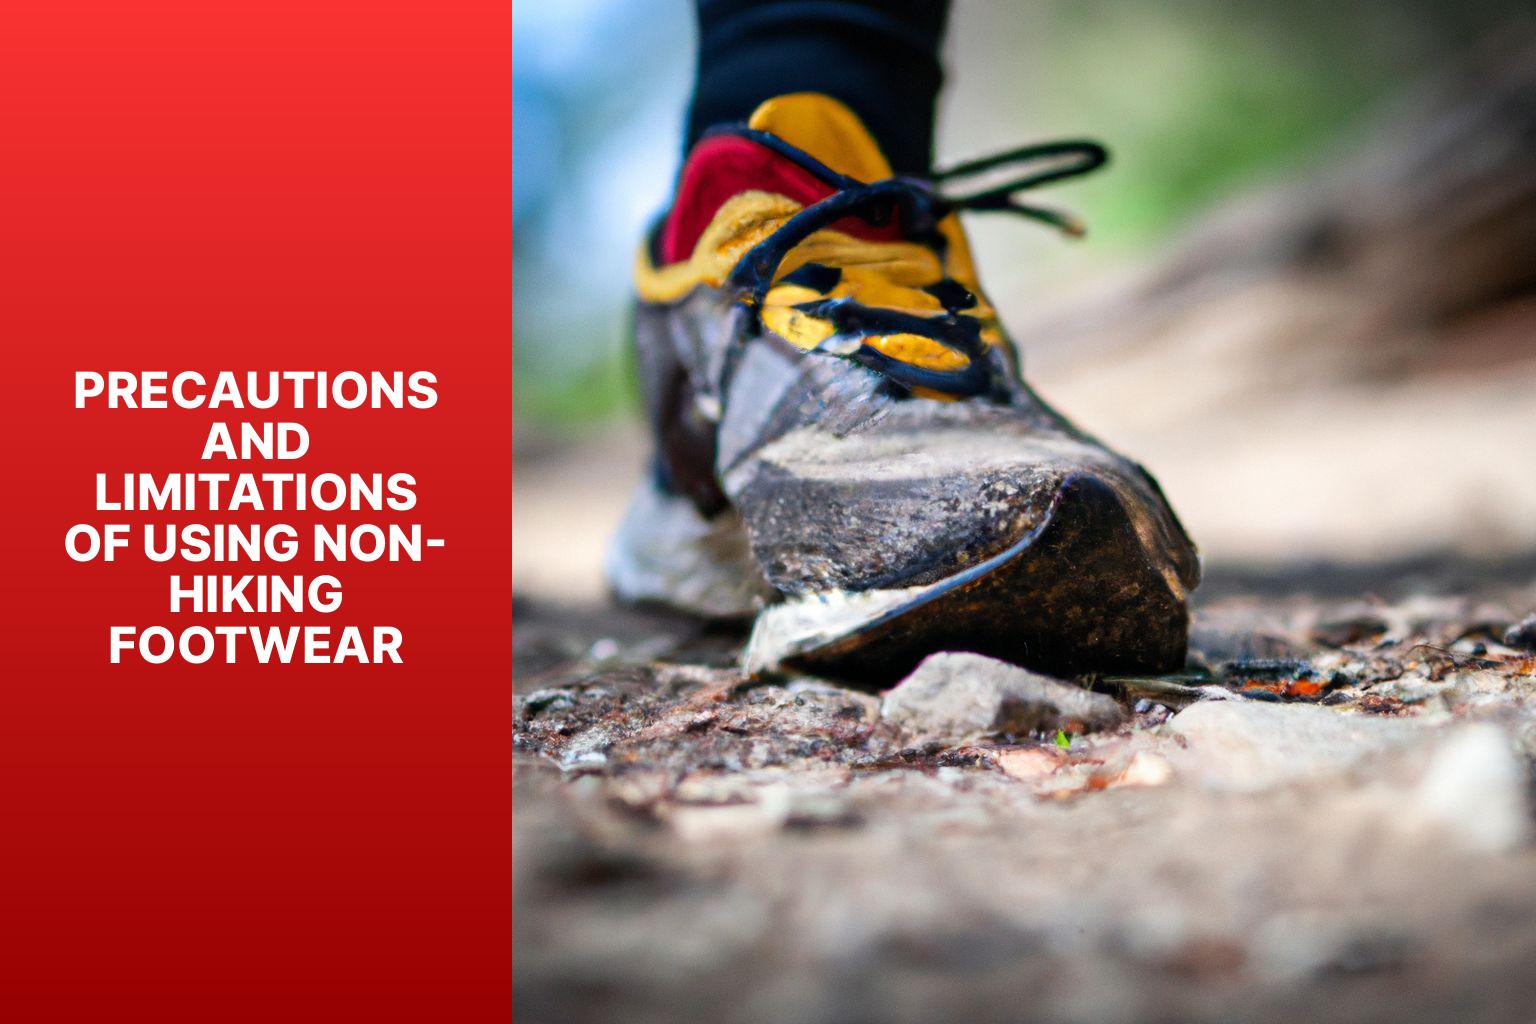 Precautions and Limitations of Using Non-Hiking Footwear - What to Wear if You Don